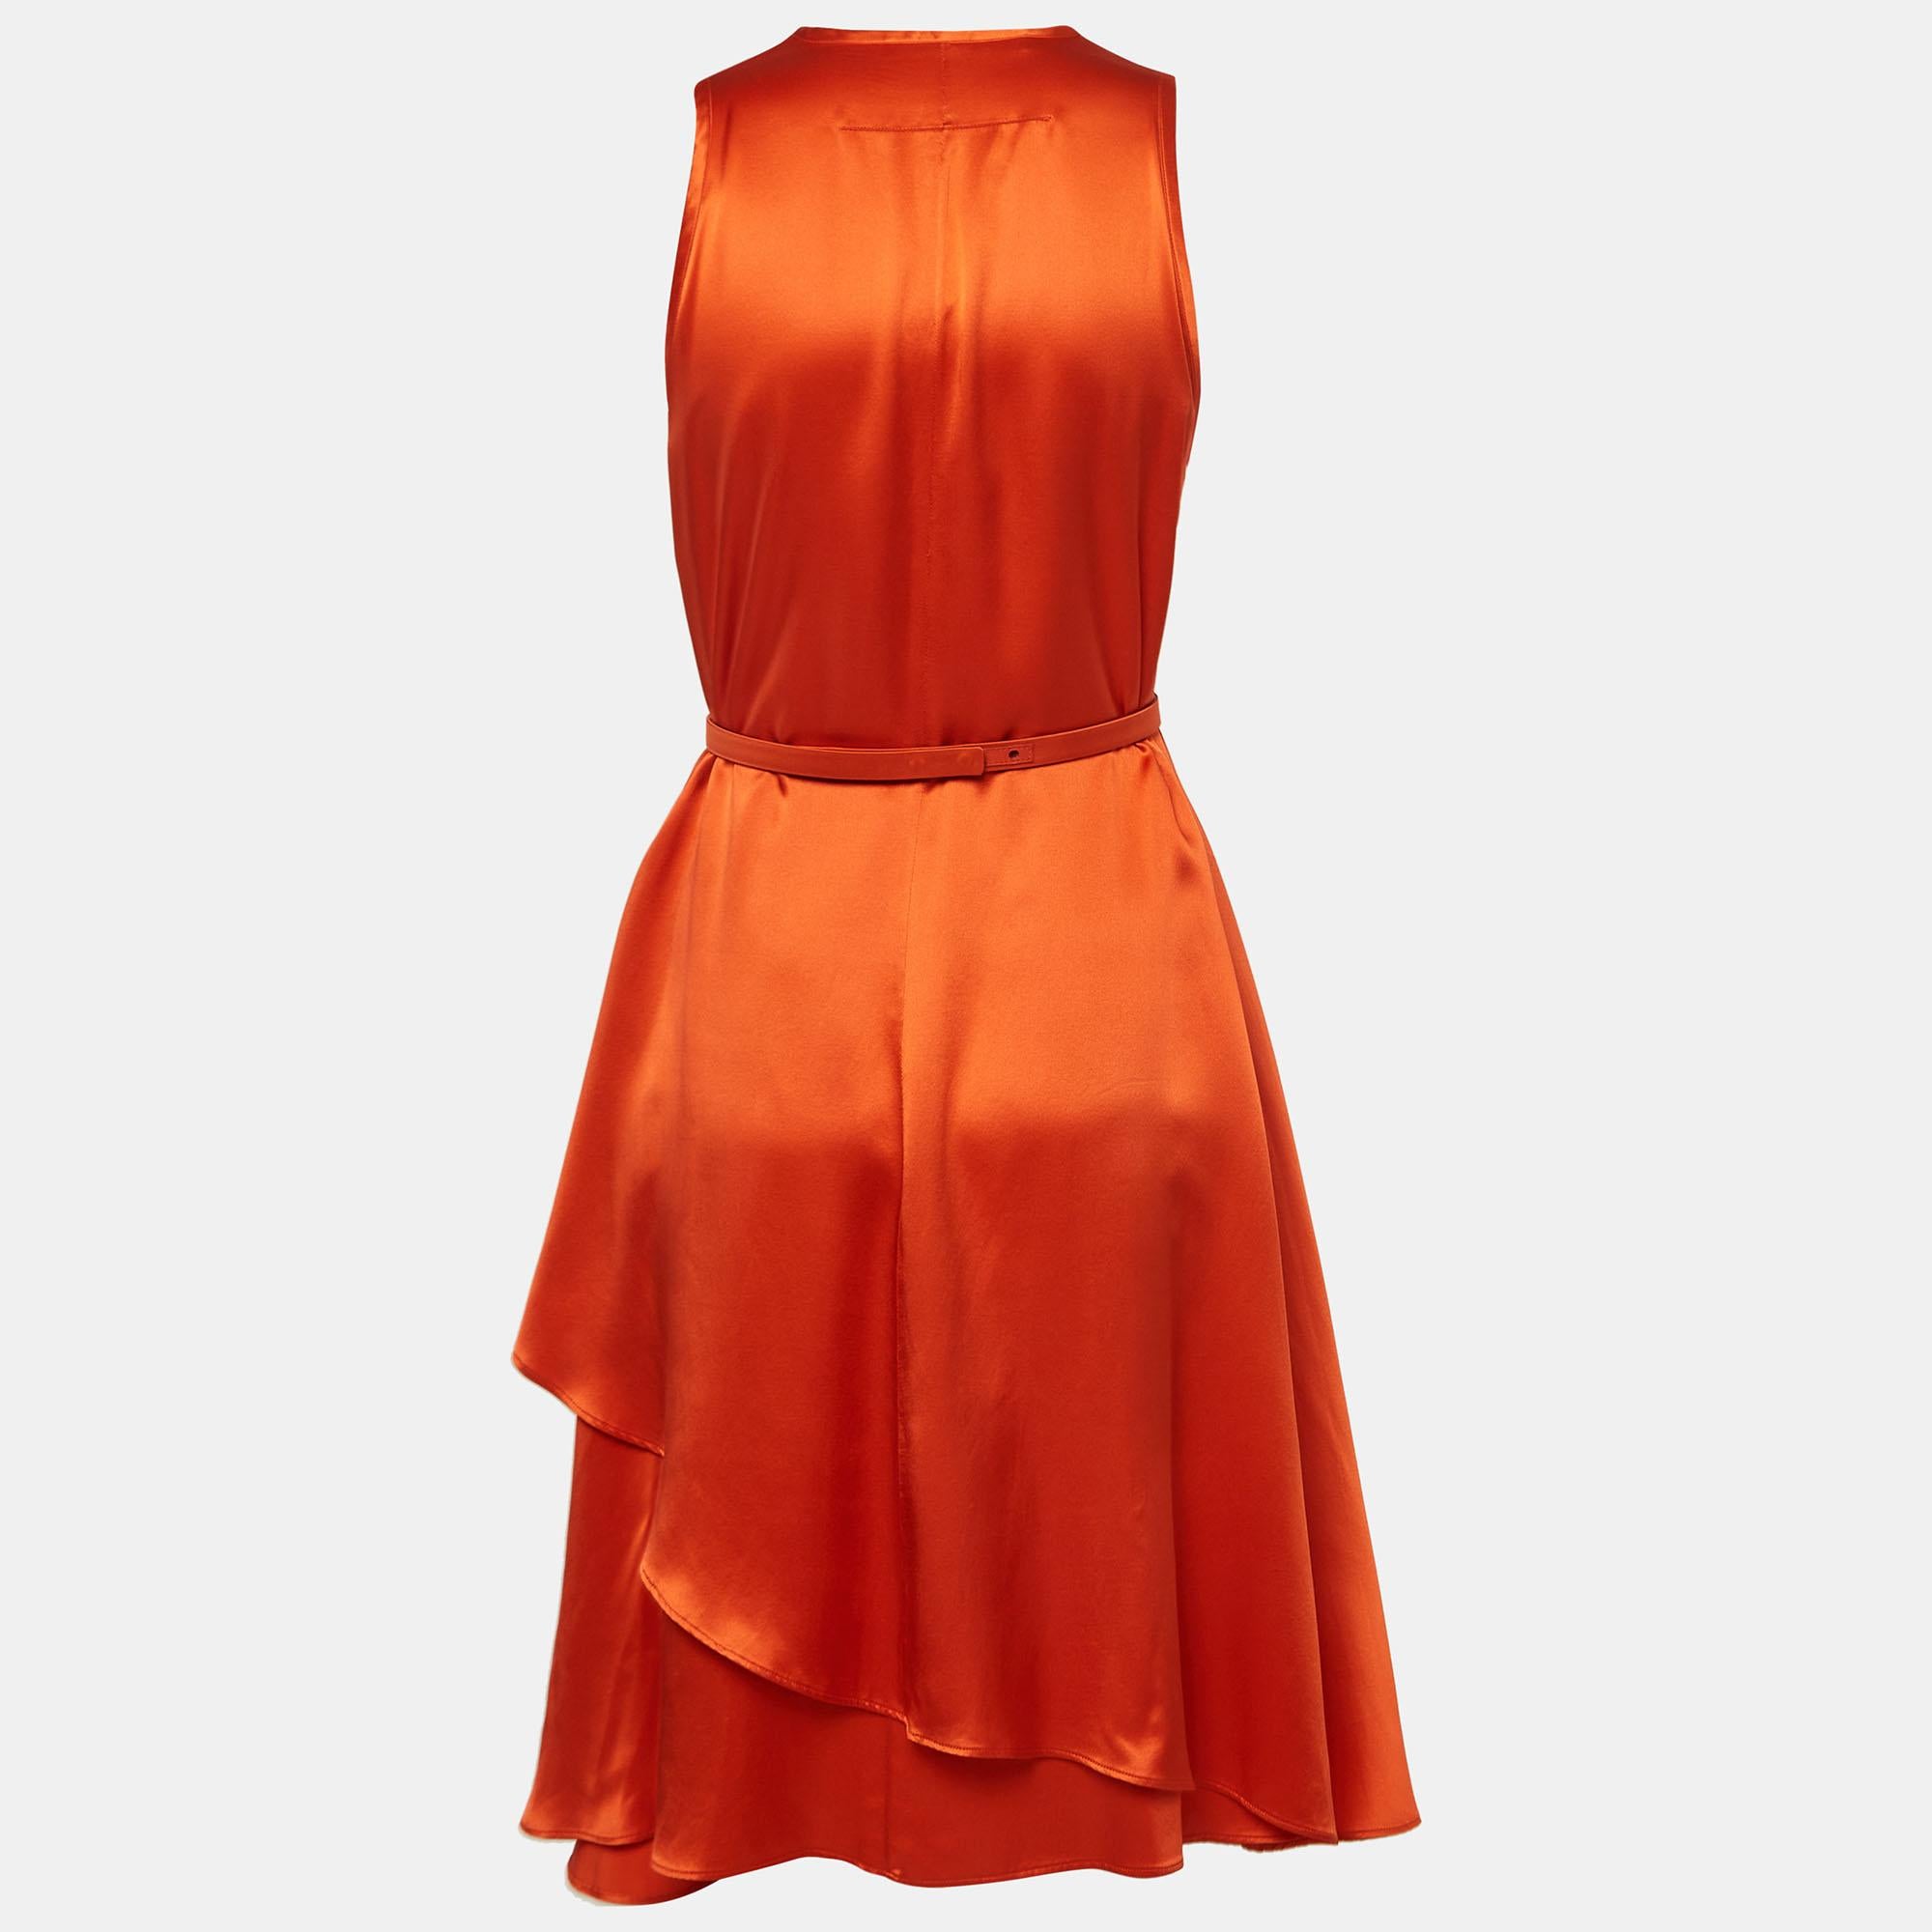 Givenchy Orange Satin Belted Sleeveless Layer Dress M In Good Condition For Sale In Dubai, Al Qouz 2